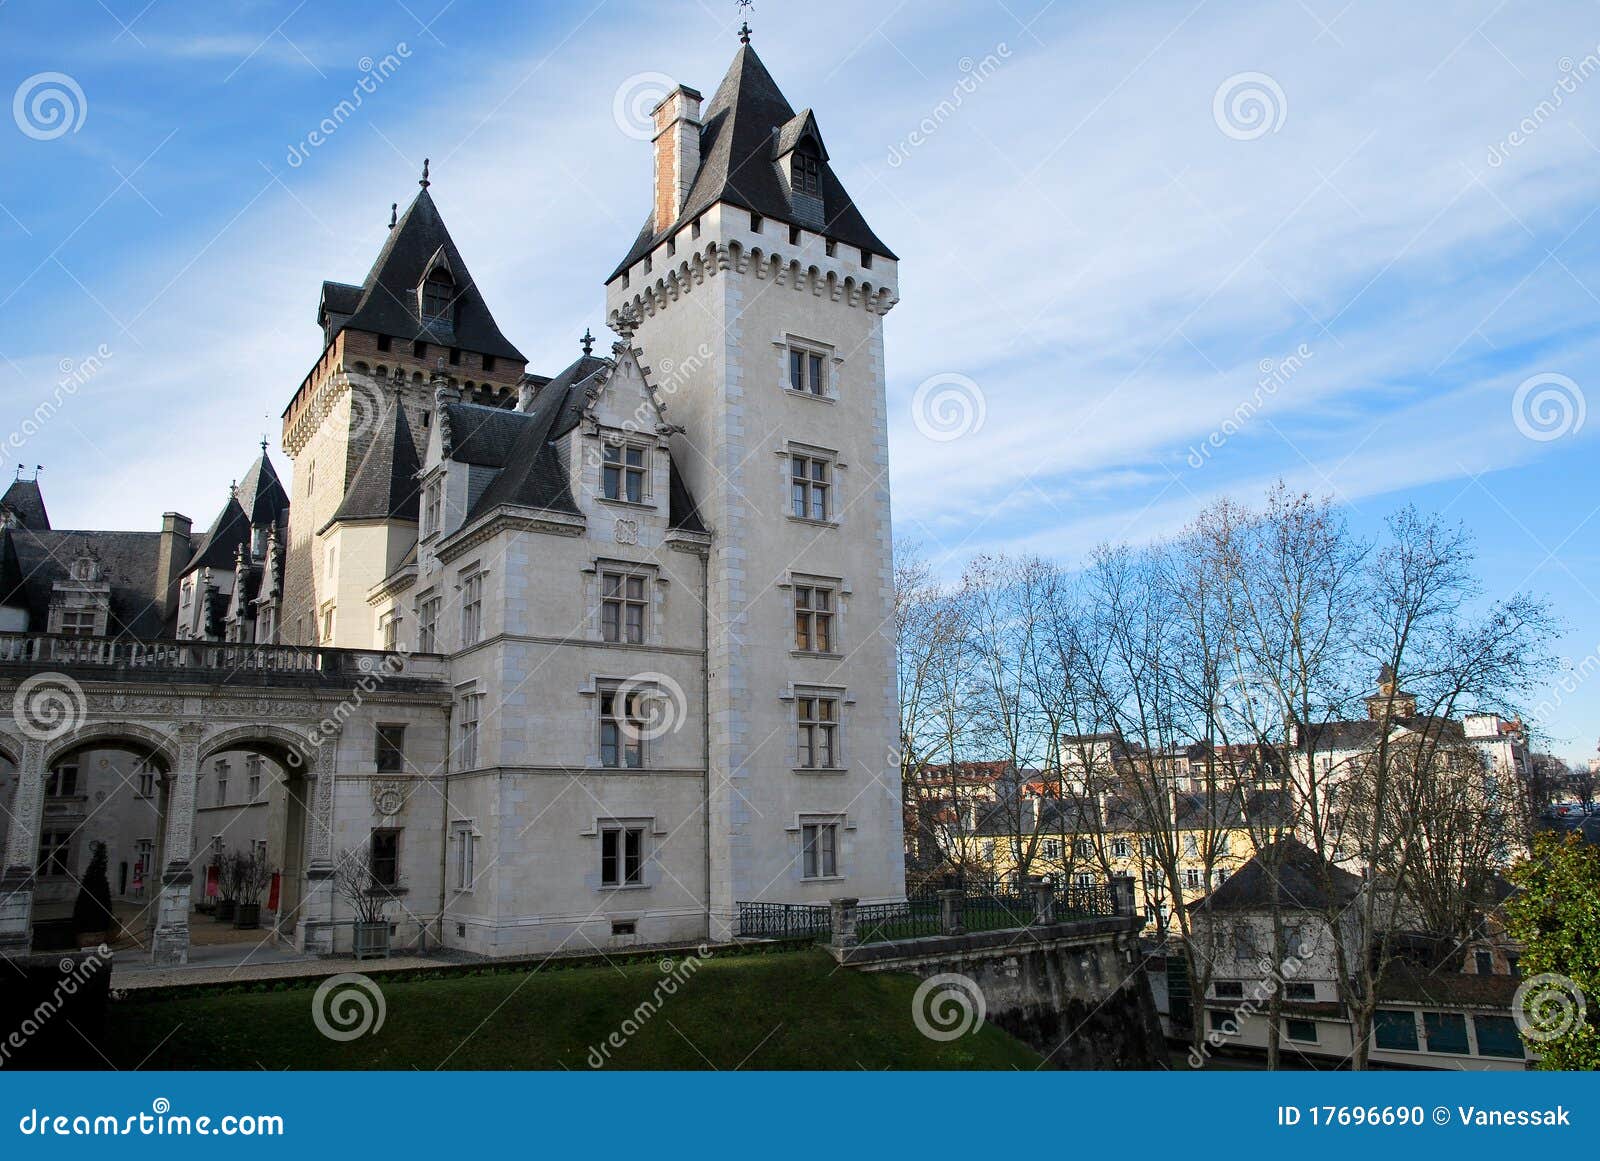 the entry of the castel of pau in france